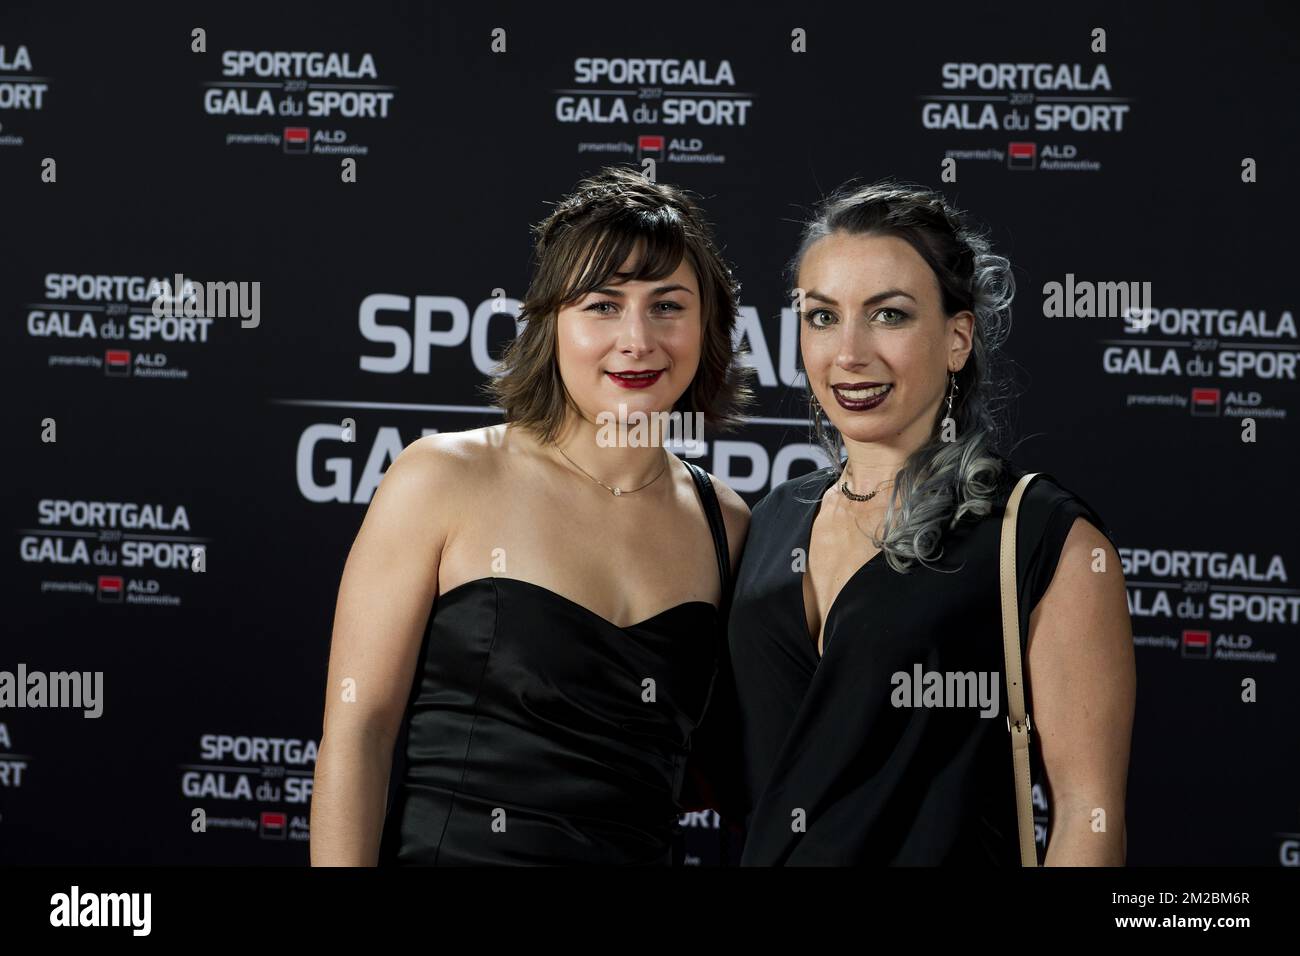 Charline Van Snick (R) pictured during the gala evening for the sport man and woman of the year 2017 awards, Saturday 16 December 2017, in Brussels. BELGA PHOTO JASPER JACOBS Stock Photo